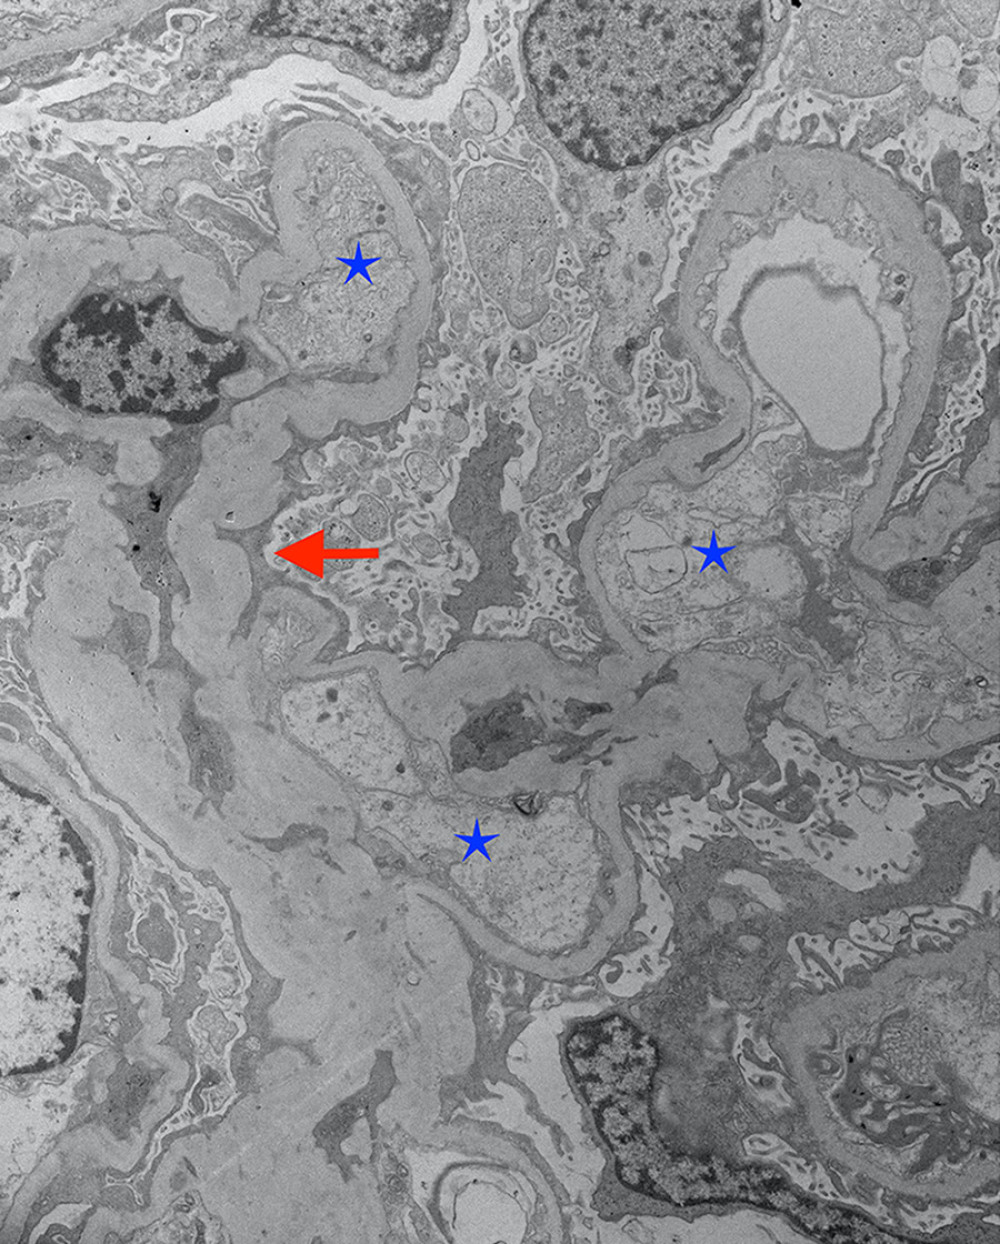 Electron microscopy showing podocyte effacement (red arrow) and swollen endothelial cells (blue stars) confirming minimal change disease.